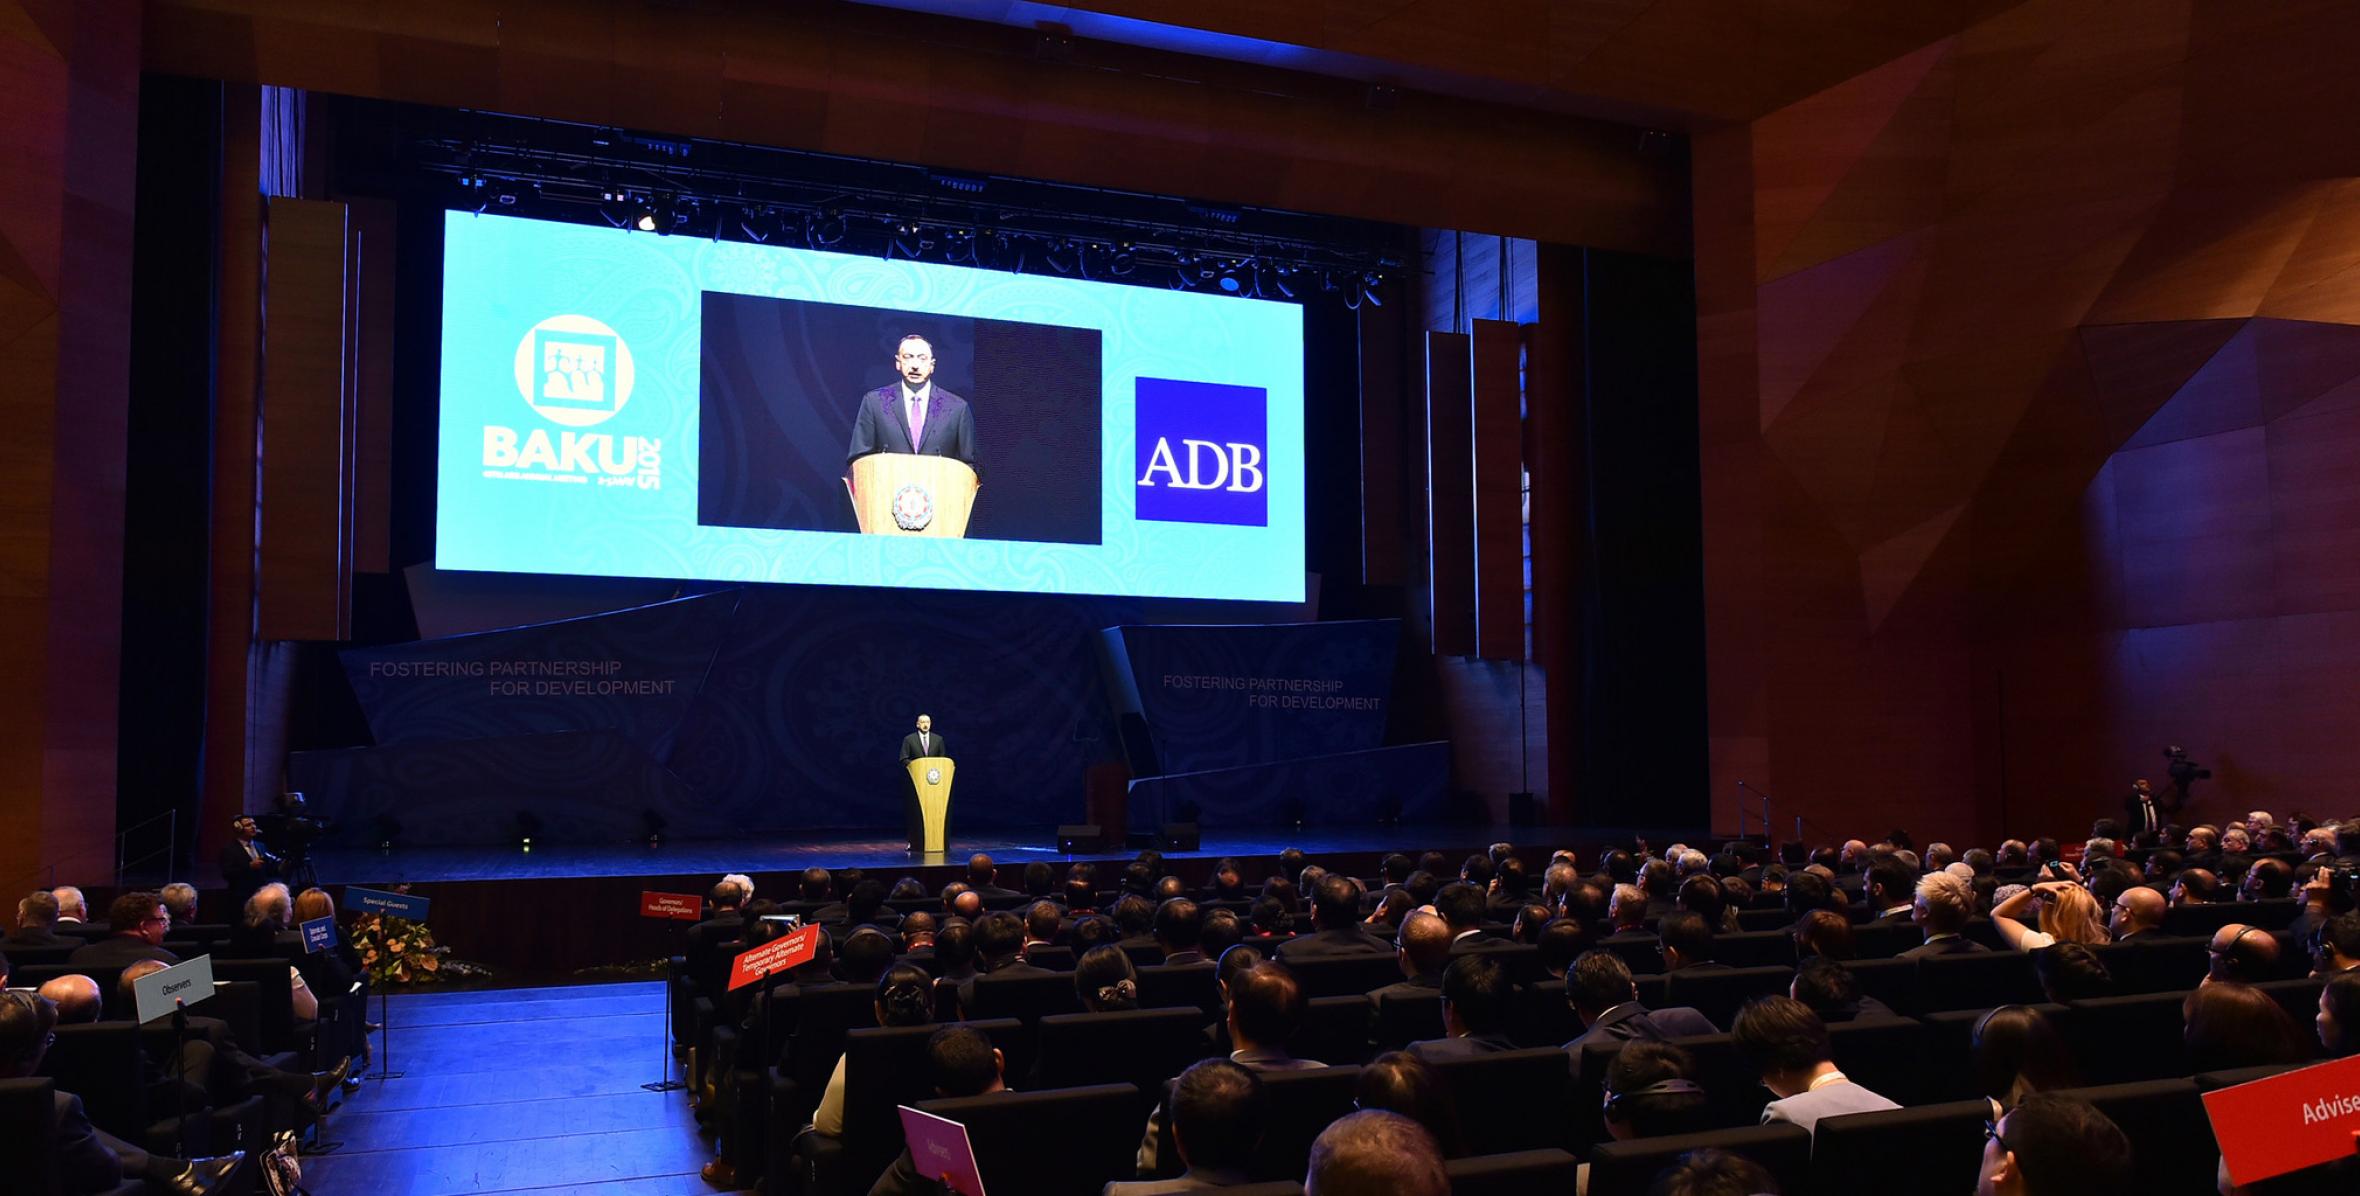 Speech by Ilham Aliyev at the official opening ceremony of the 48th Annual Meeting of the Board of Governors of the Asian Development Bank